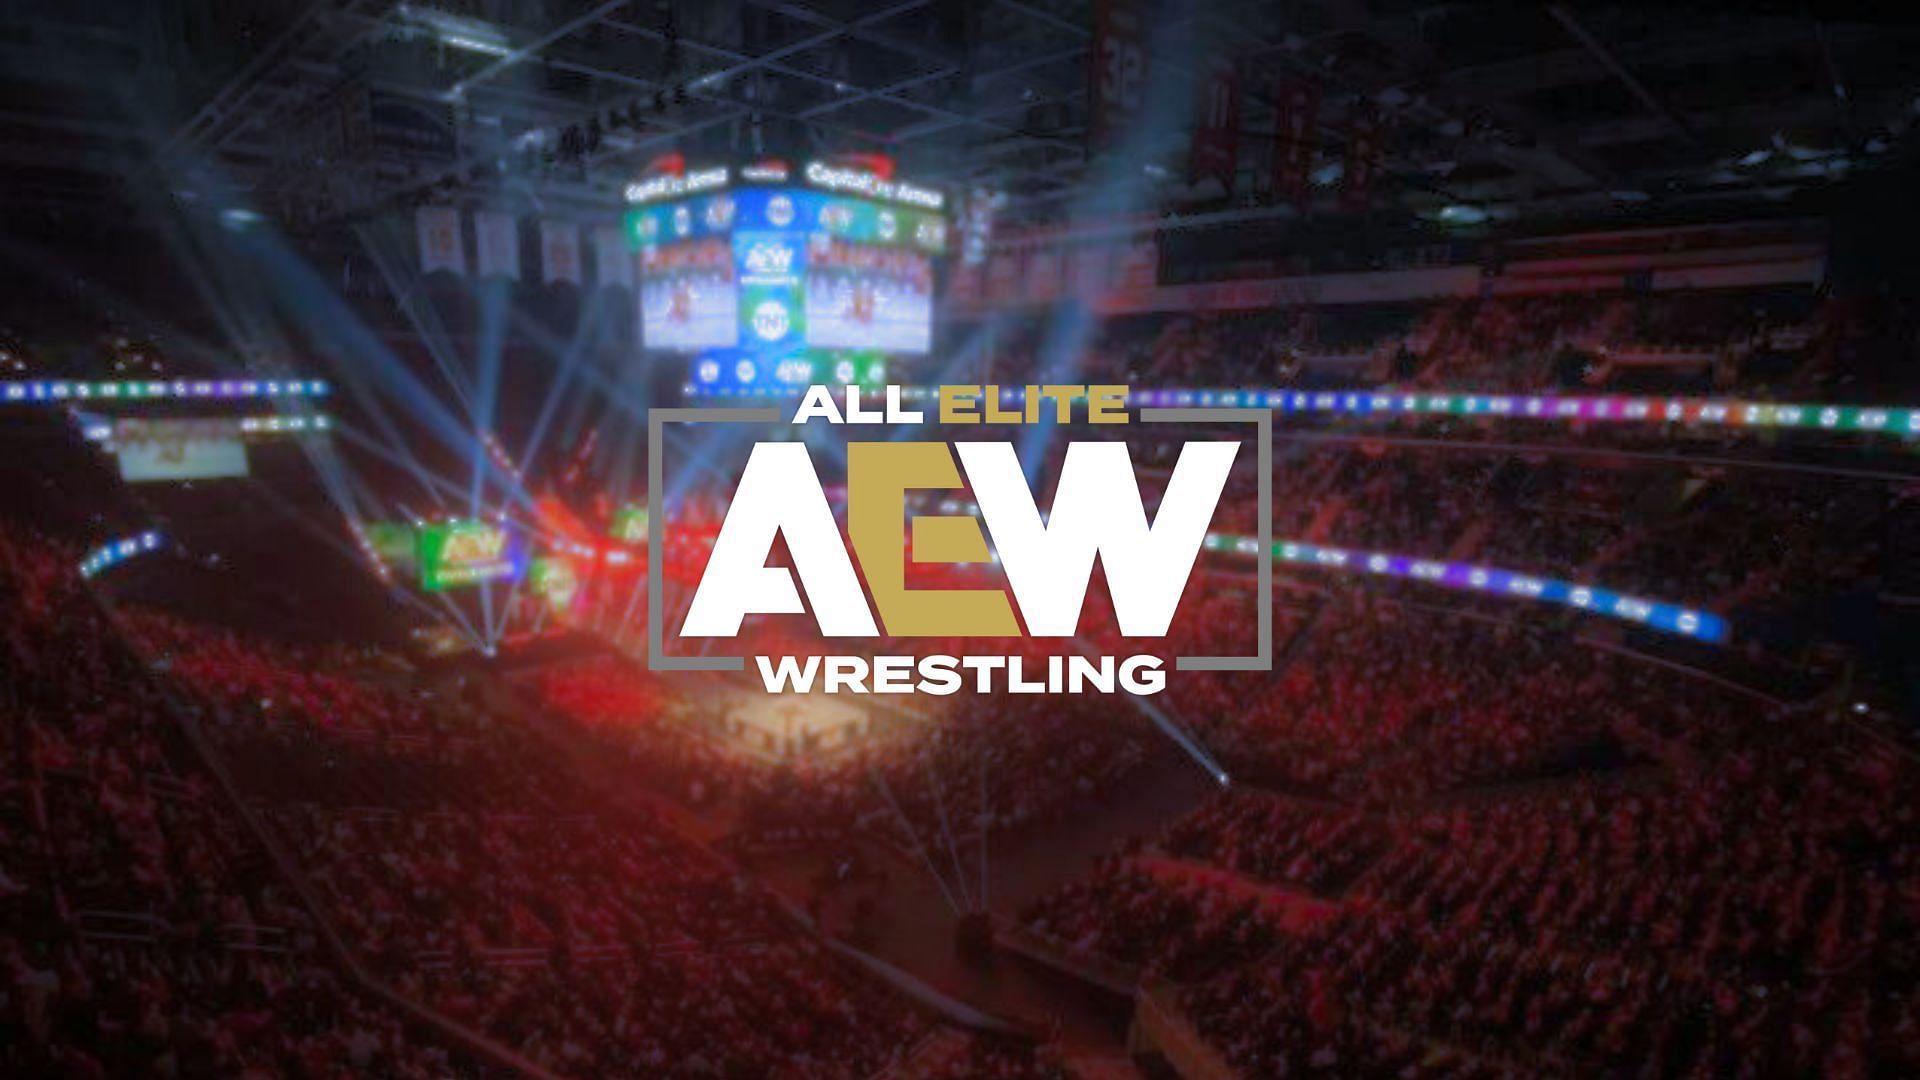 Did AEW an star suffered an injury recently?